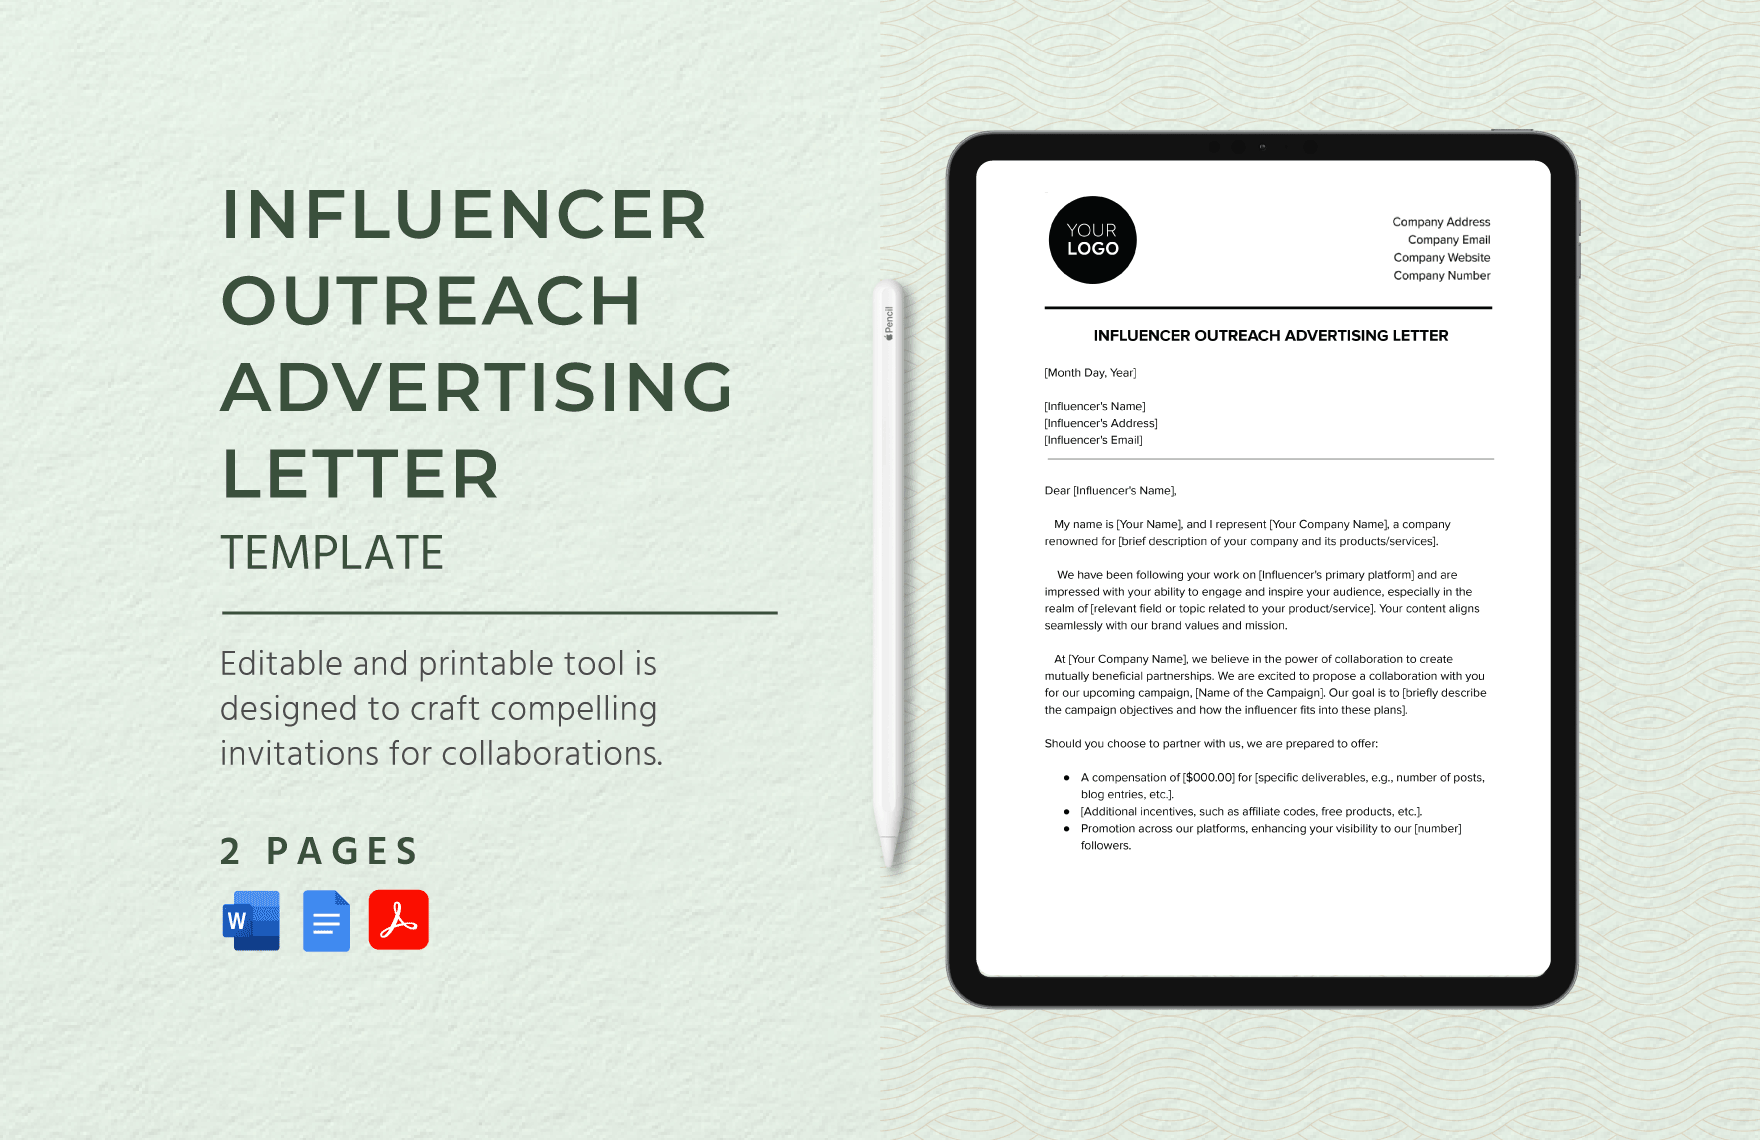 Influencer Outreach Advertising Letter Template